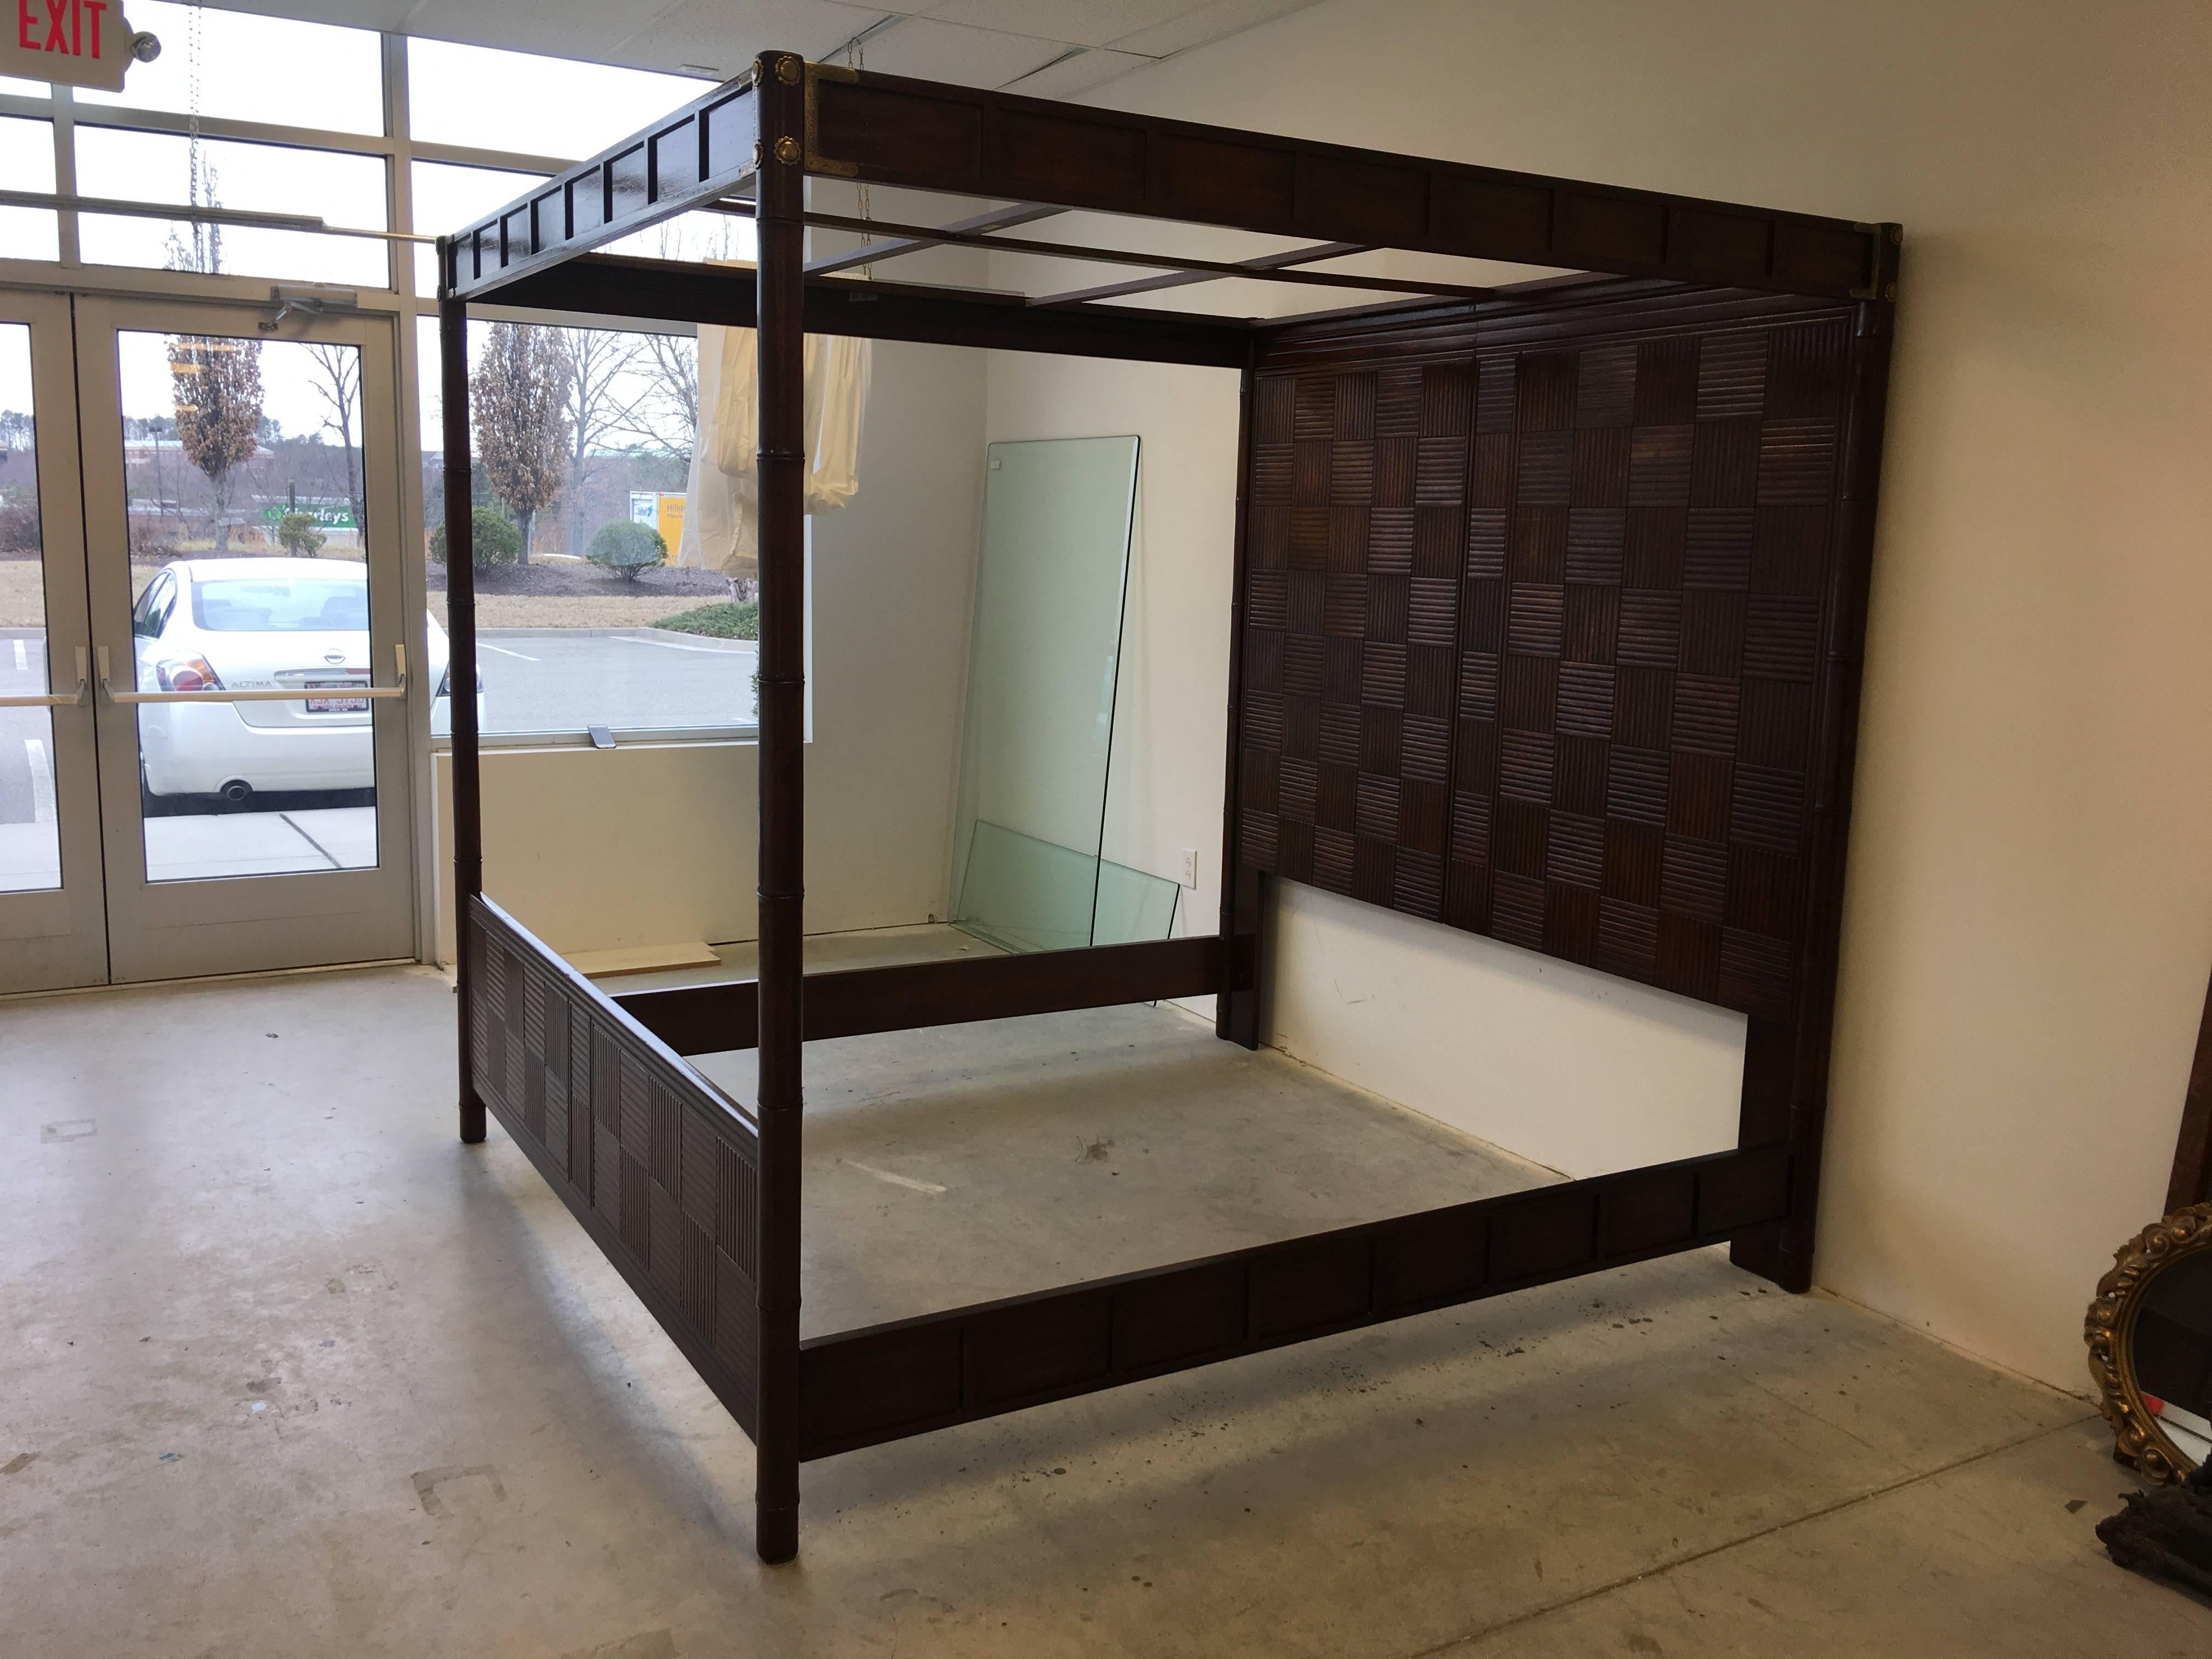 Offered is a stunning, 1970s Henredon Fine Furniture faux bamboo king size canopy bed, with brass Campaign style accents along the headrails. The bed is made for use with a metal bed frame, not included, and does not include or have slats to